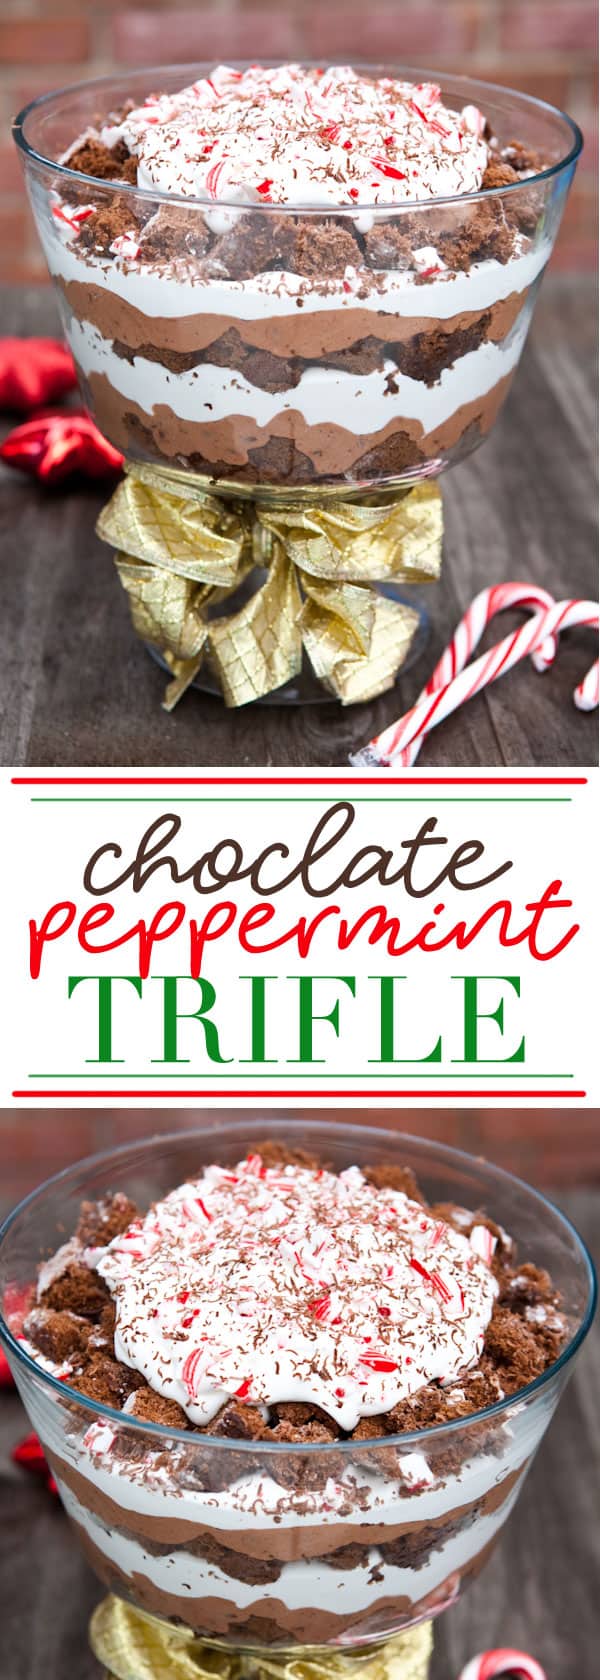 Eclectic Recipes • Chocolate Peppermint Trifle